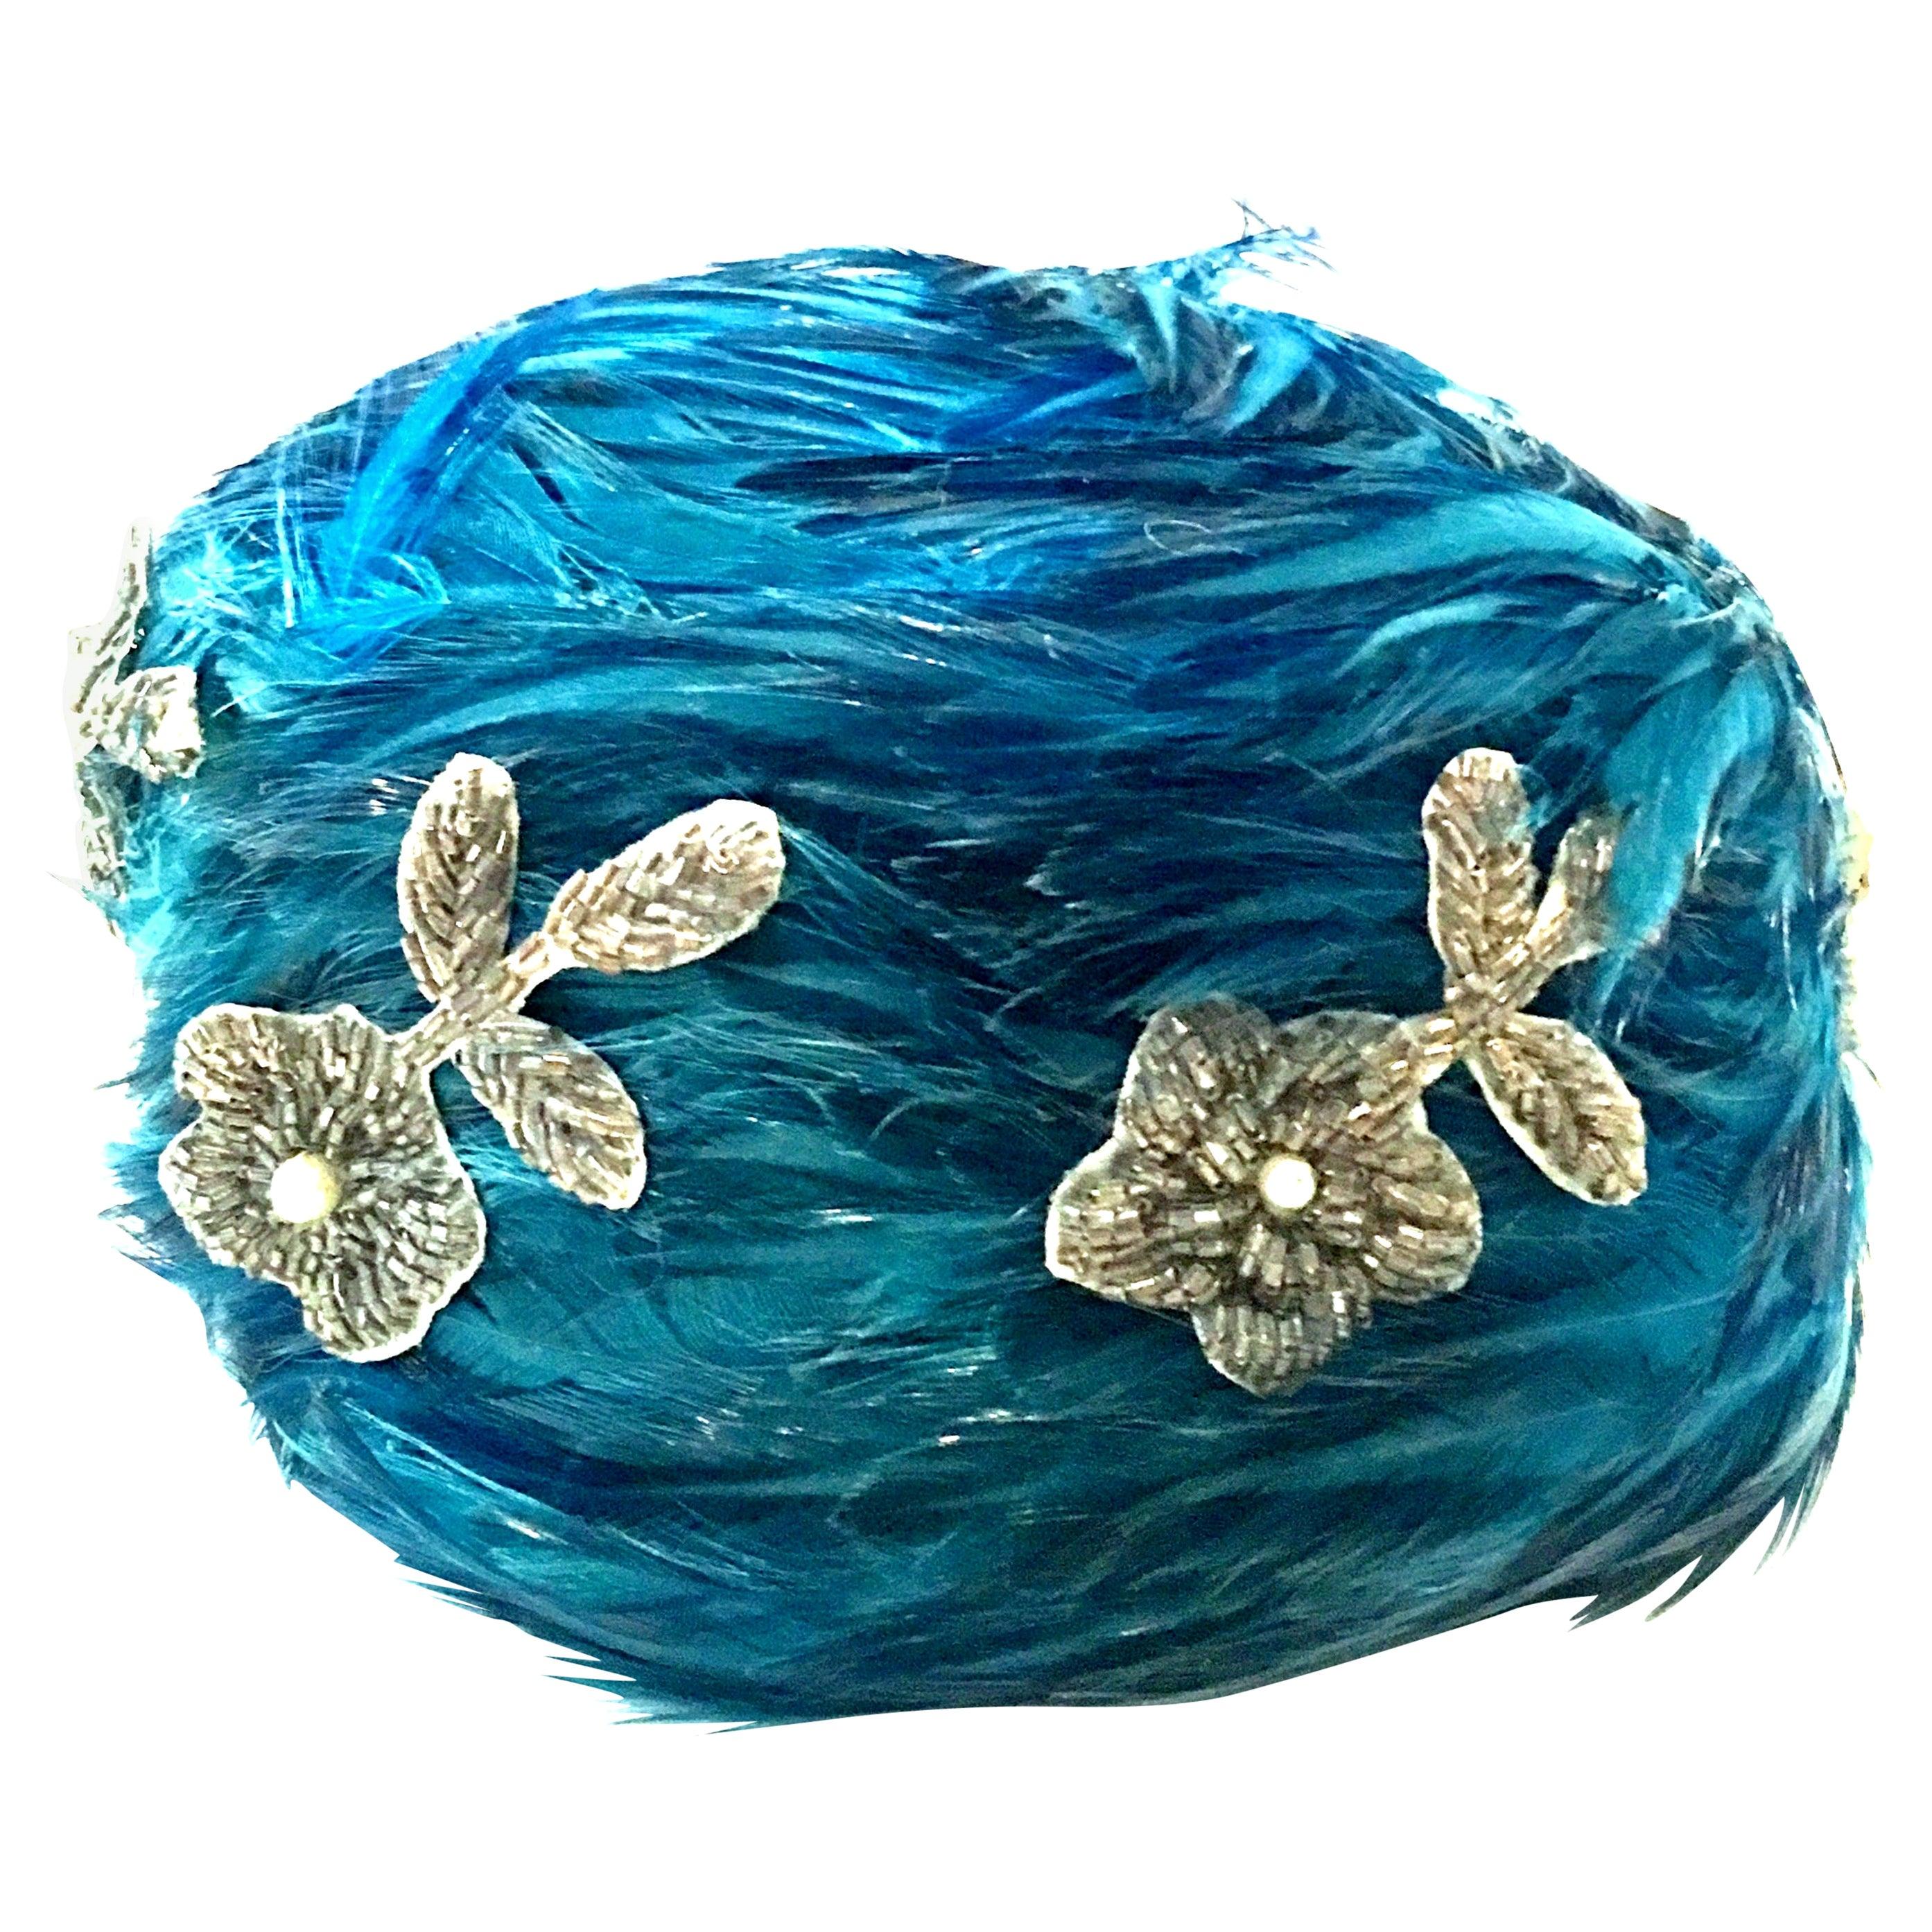 Mid-20th Century Christian Dior Chapeaux French Ostrich Feather & Beaded Applique Hat. This coveted collectors piece features vivid turquoise swirling ostrich feathers with six abstract floral hand glass beaded  and pearl appliques. Signed on the